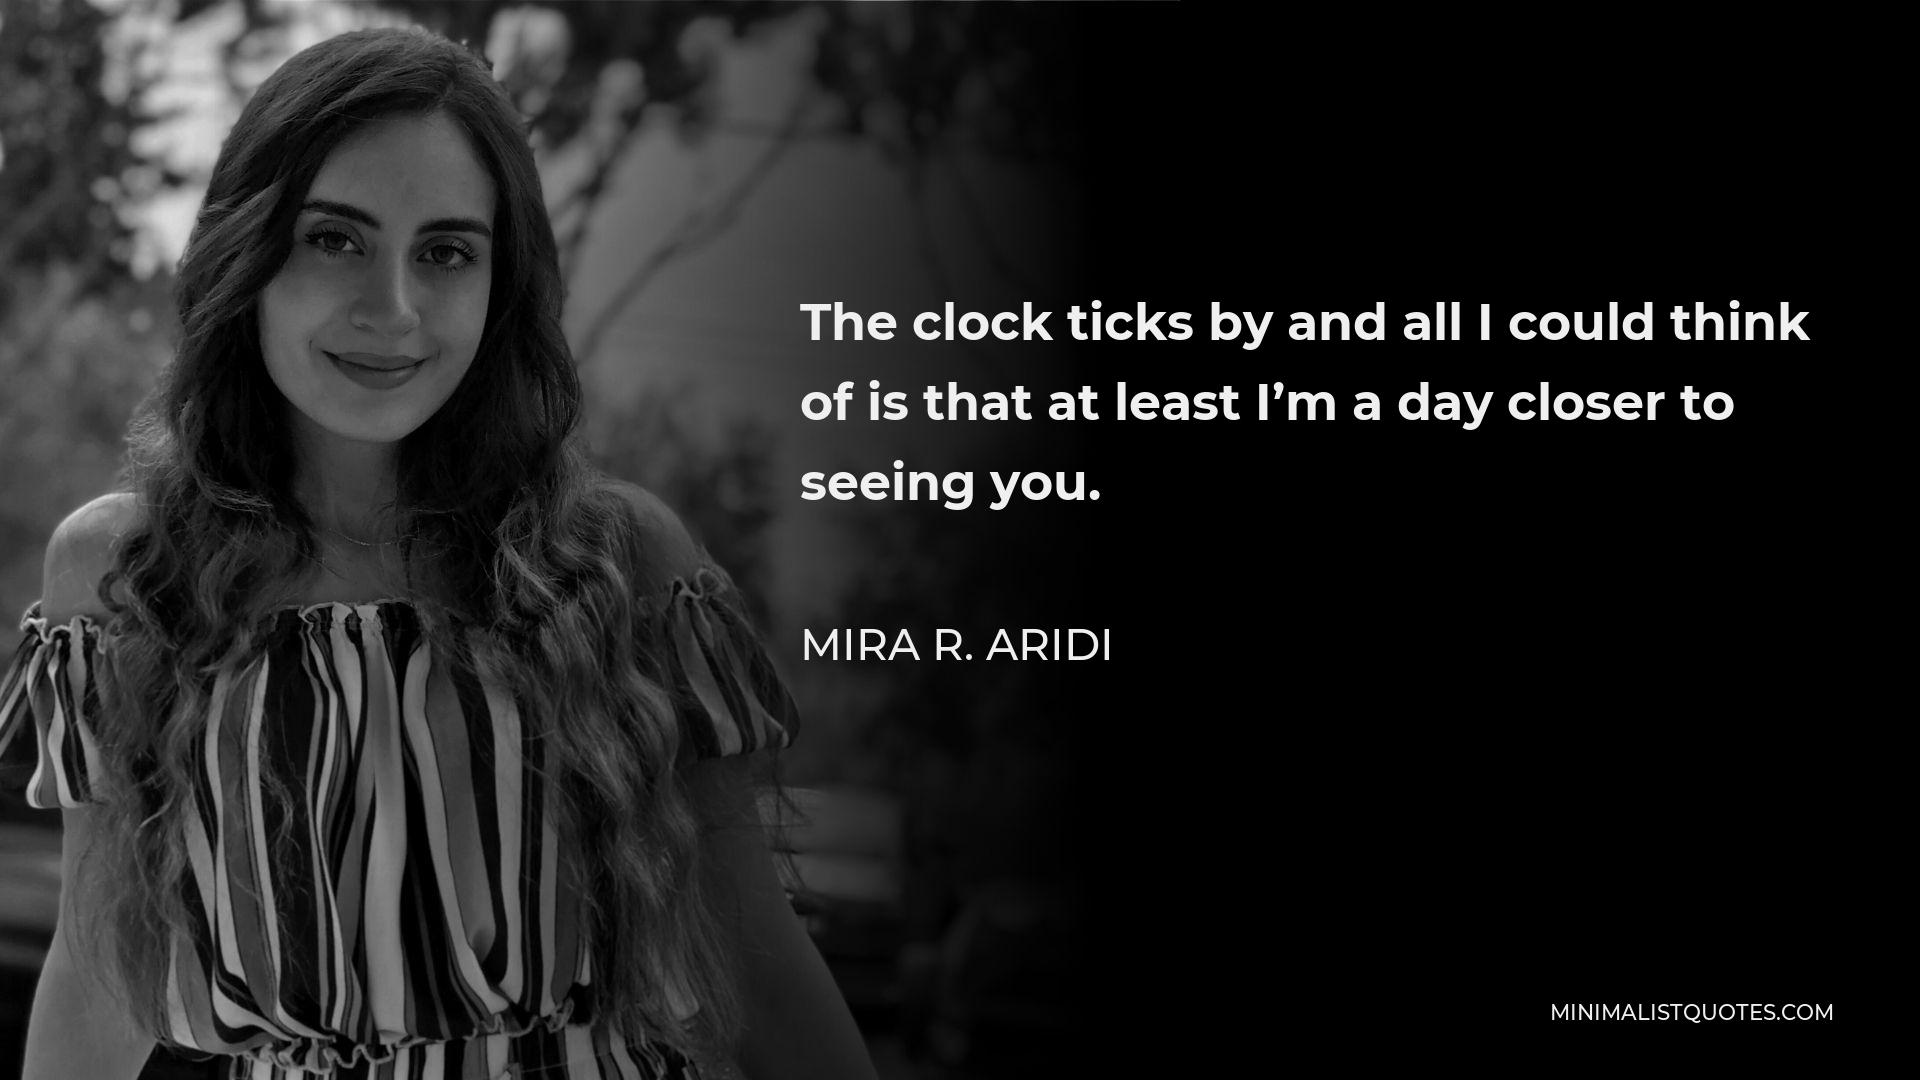 Mira R. Aridi Quote - The clock ticks by and all I could think of is that at least I’m a day closer to seeing you.